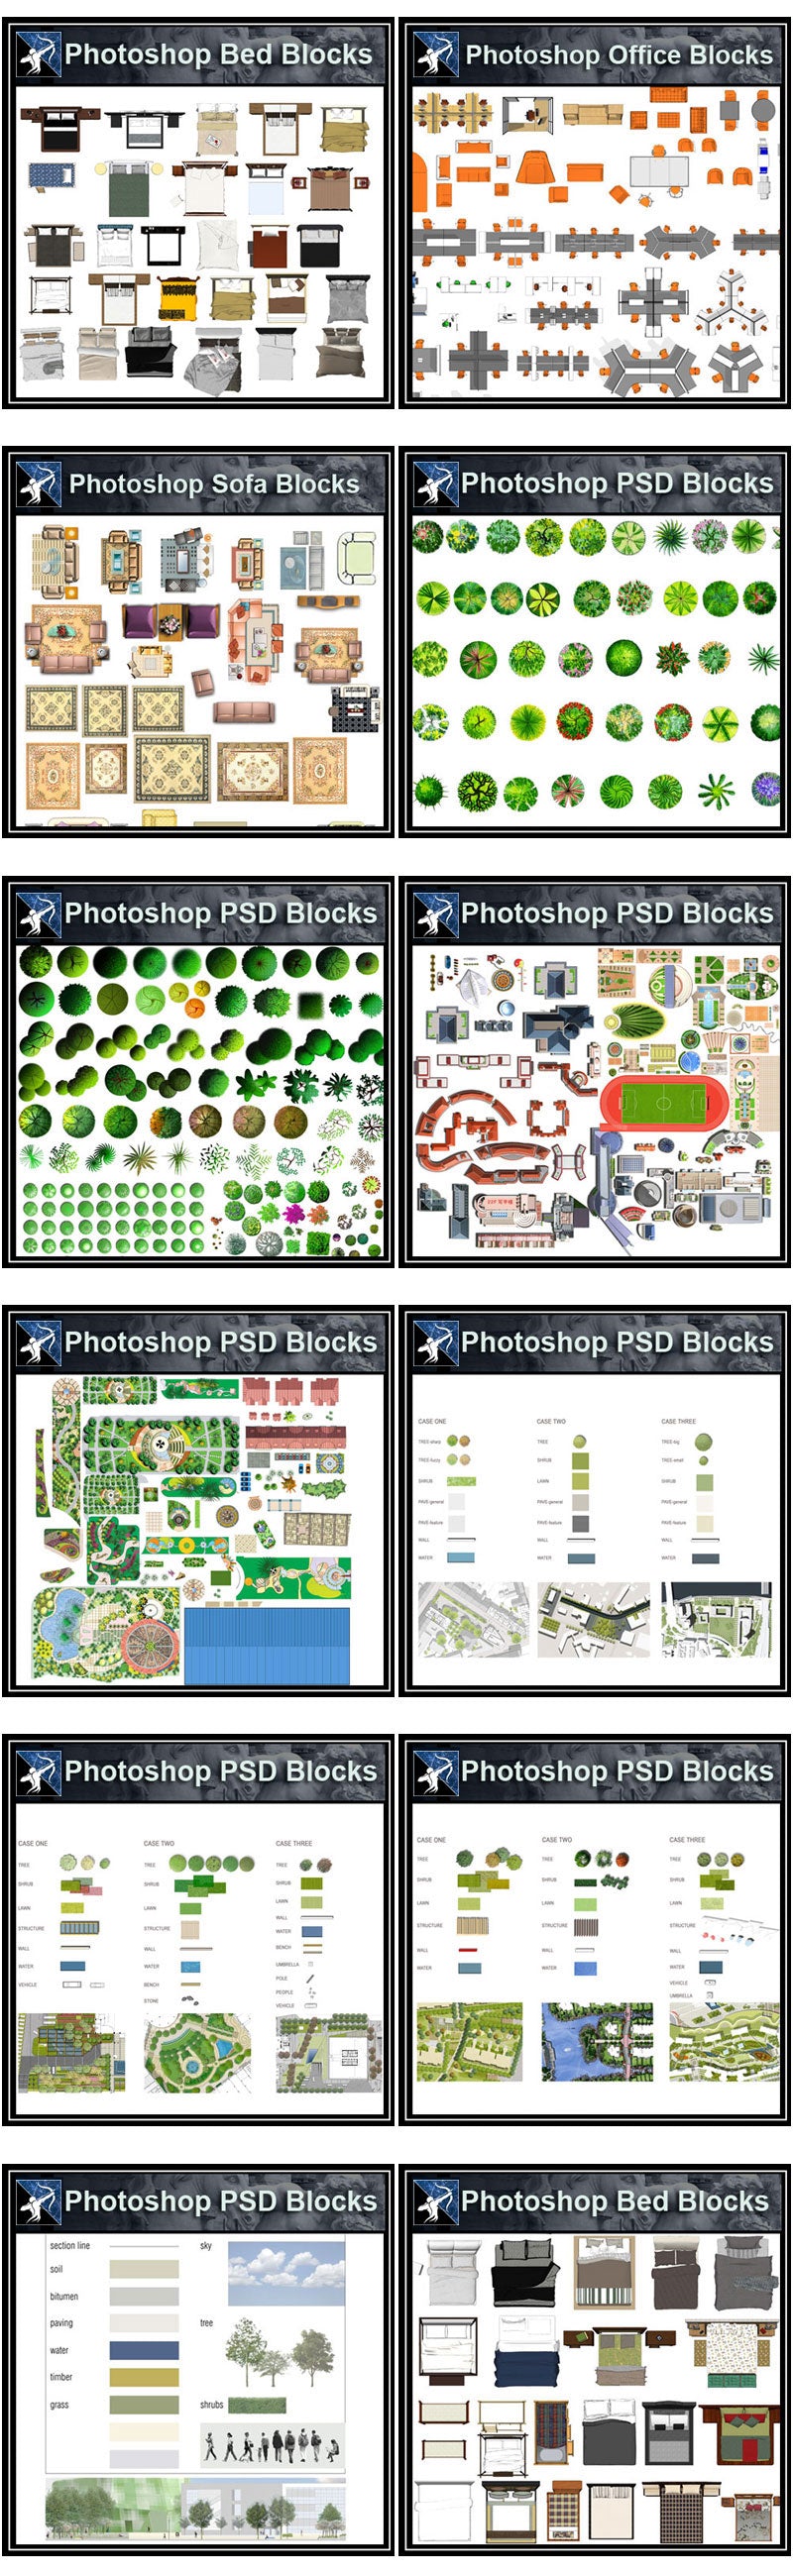 ★Full Photoshop PSD Blocks Collection (Best Recommanded!!)